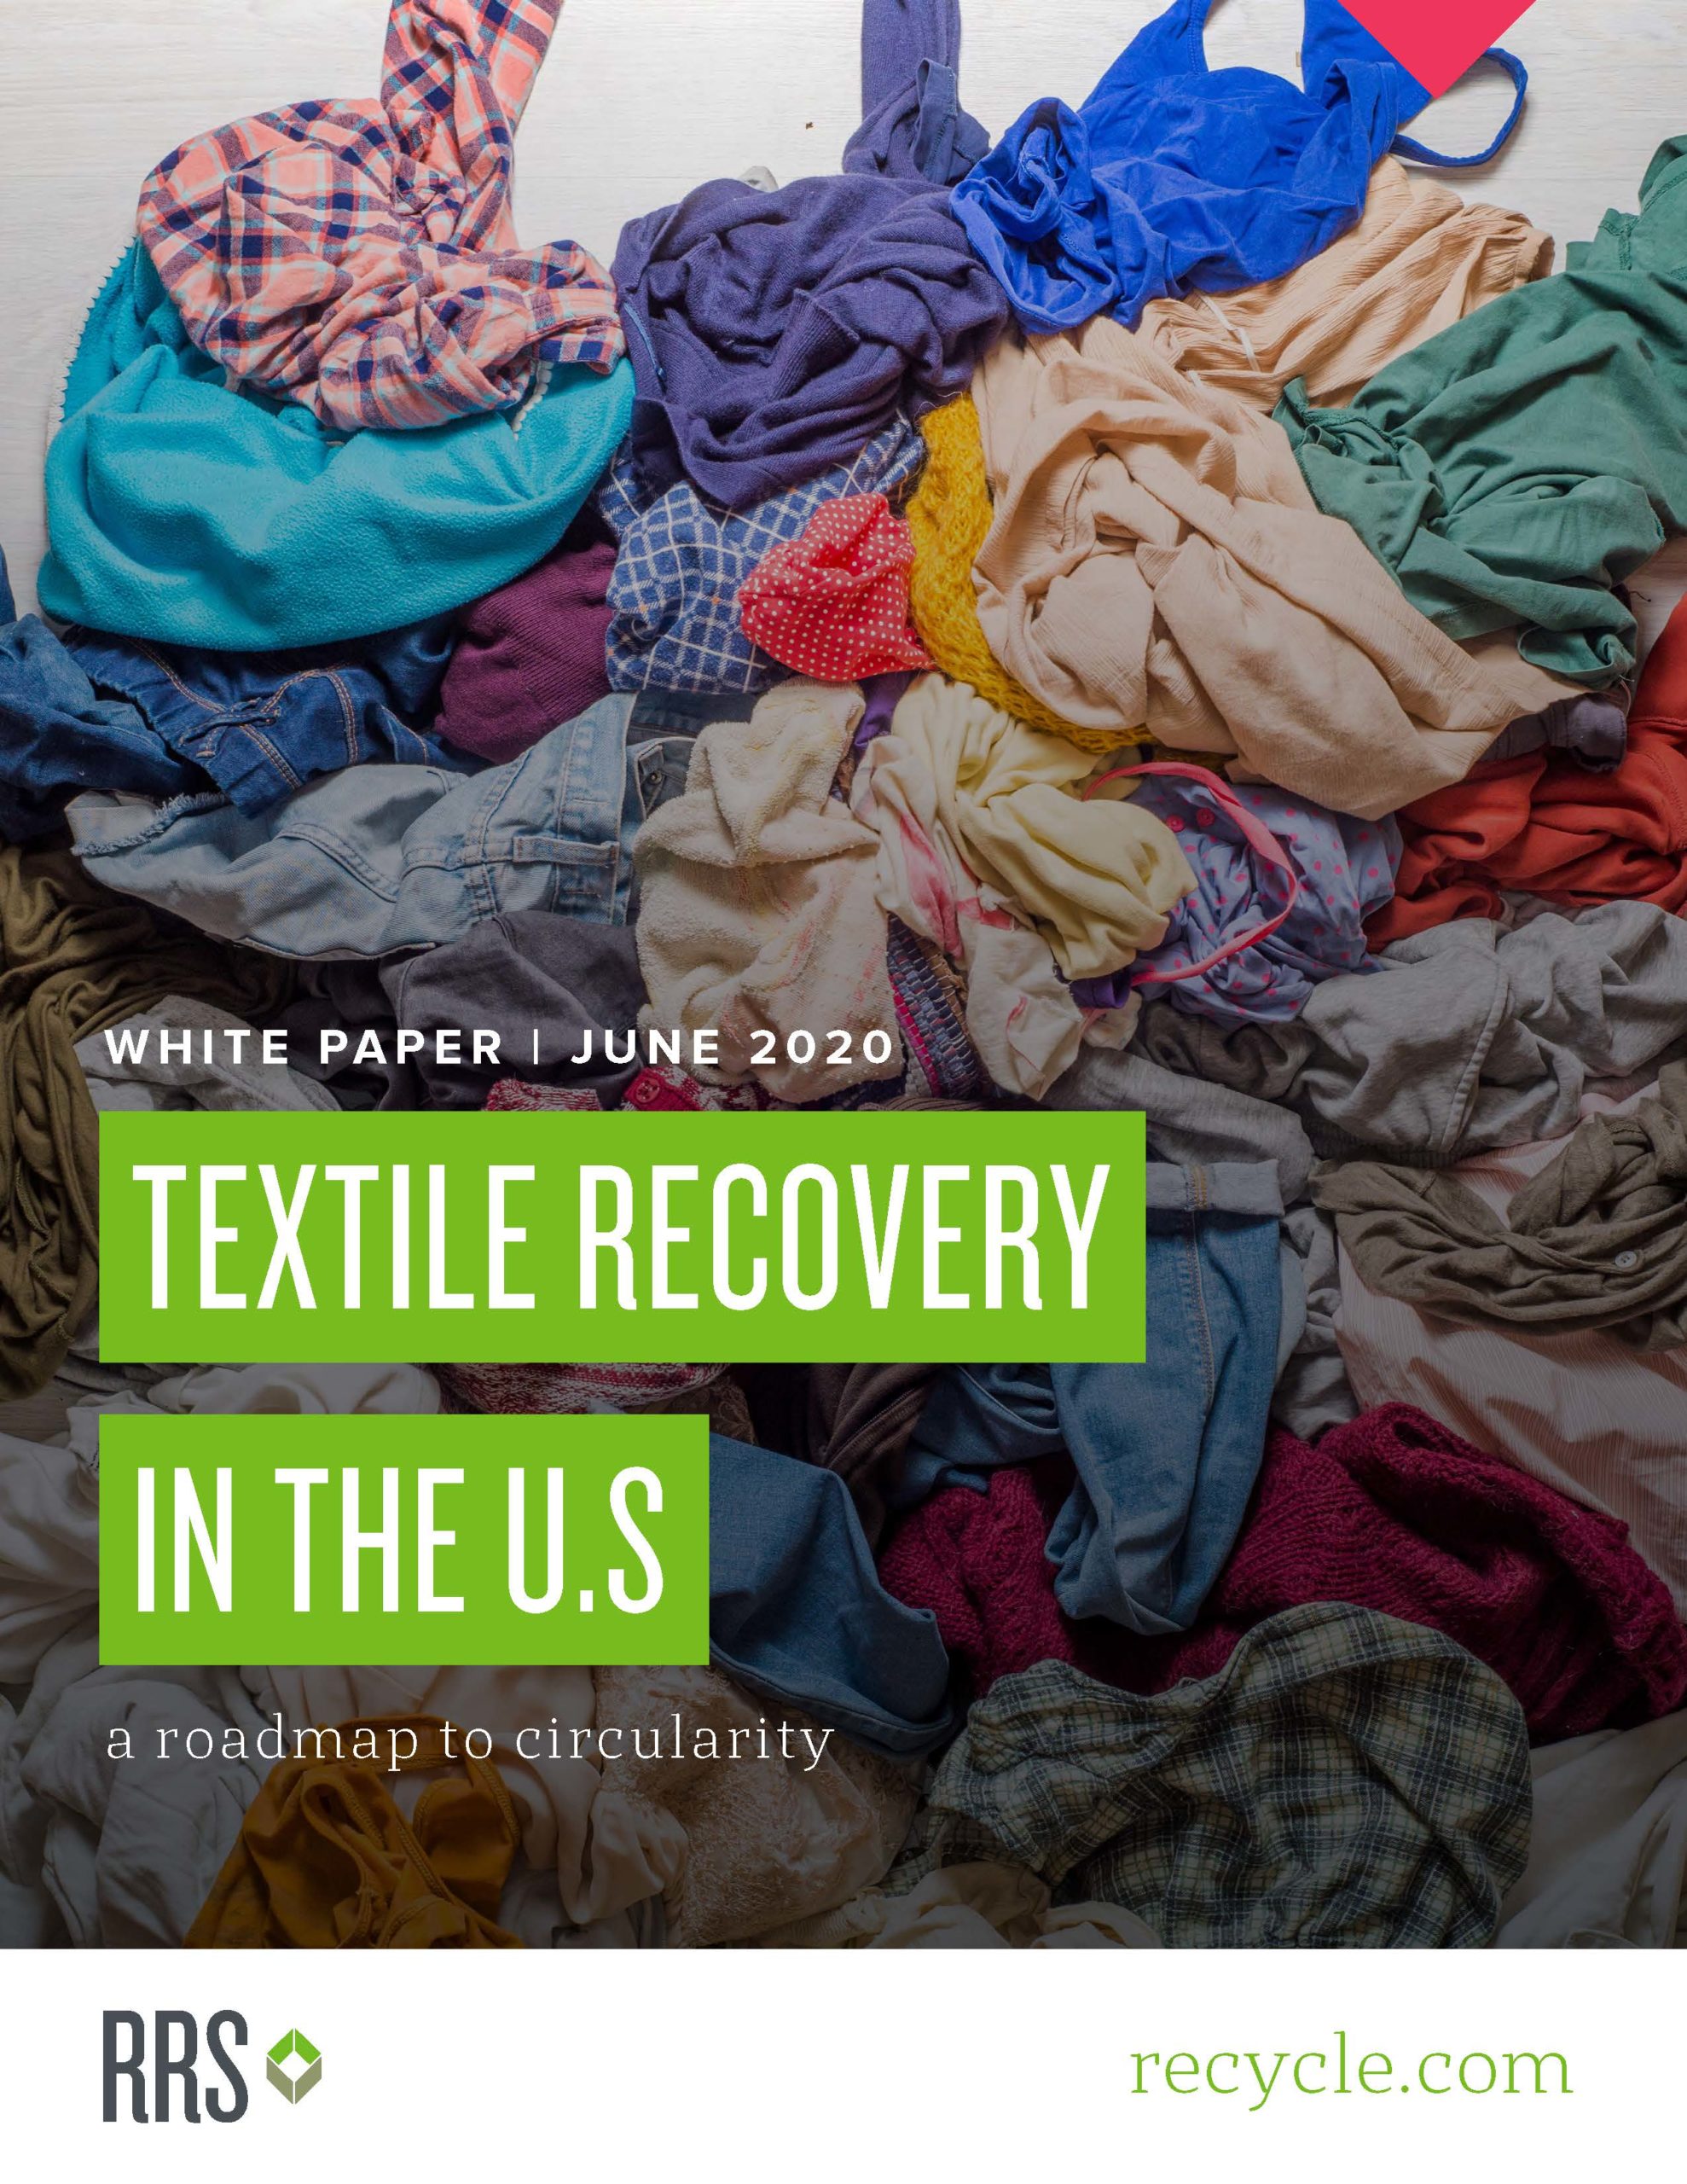 New platform for textile-to-textile recycling